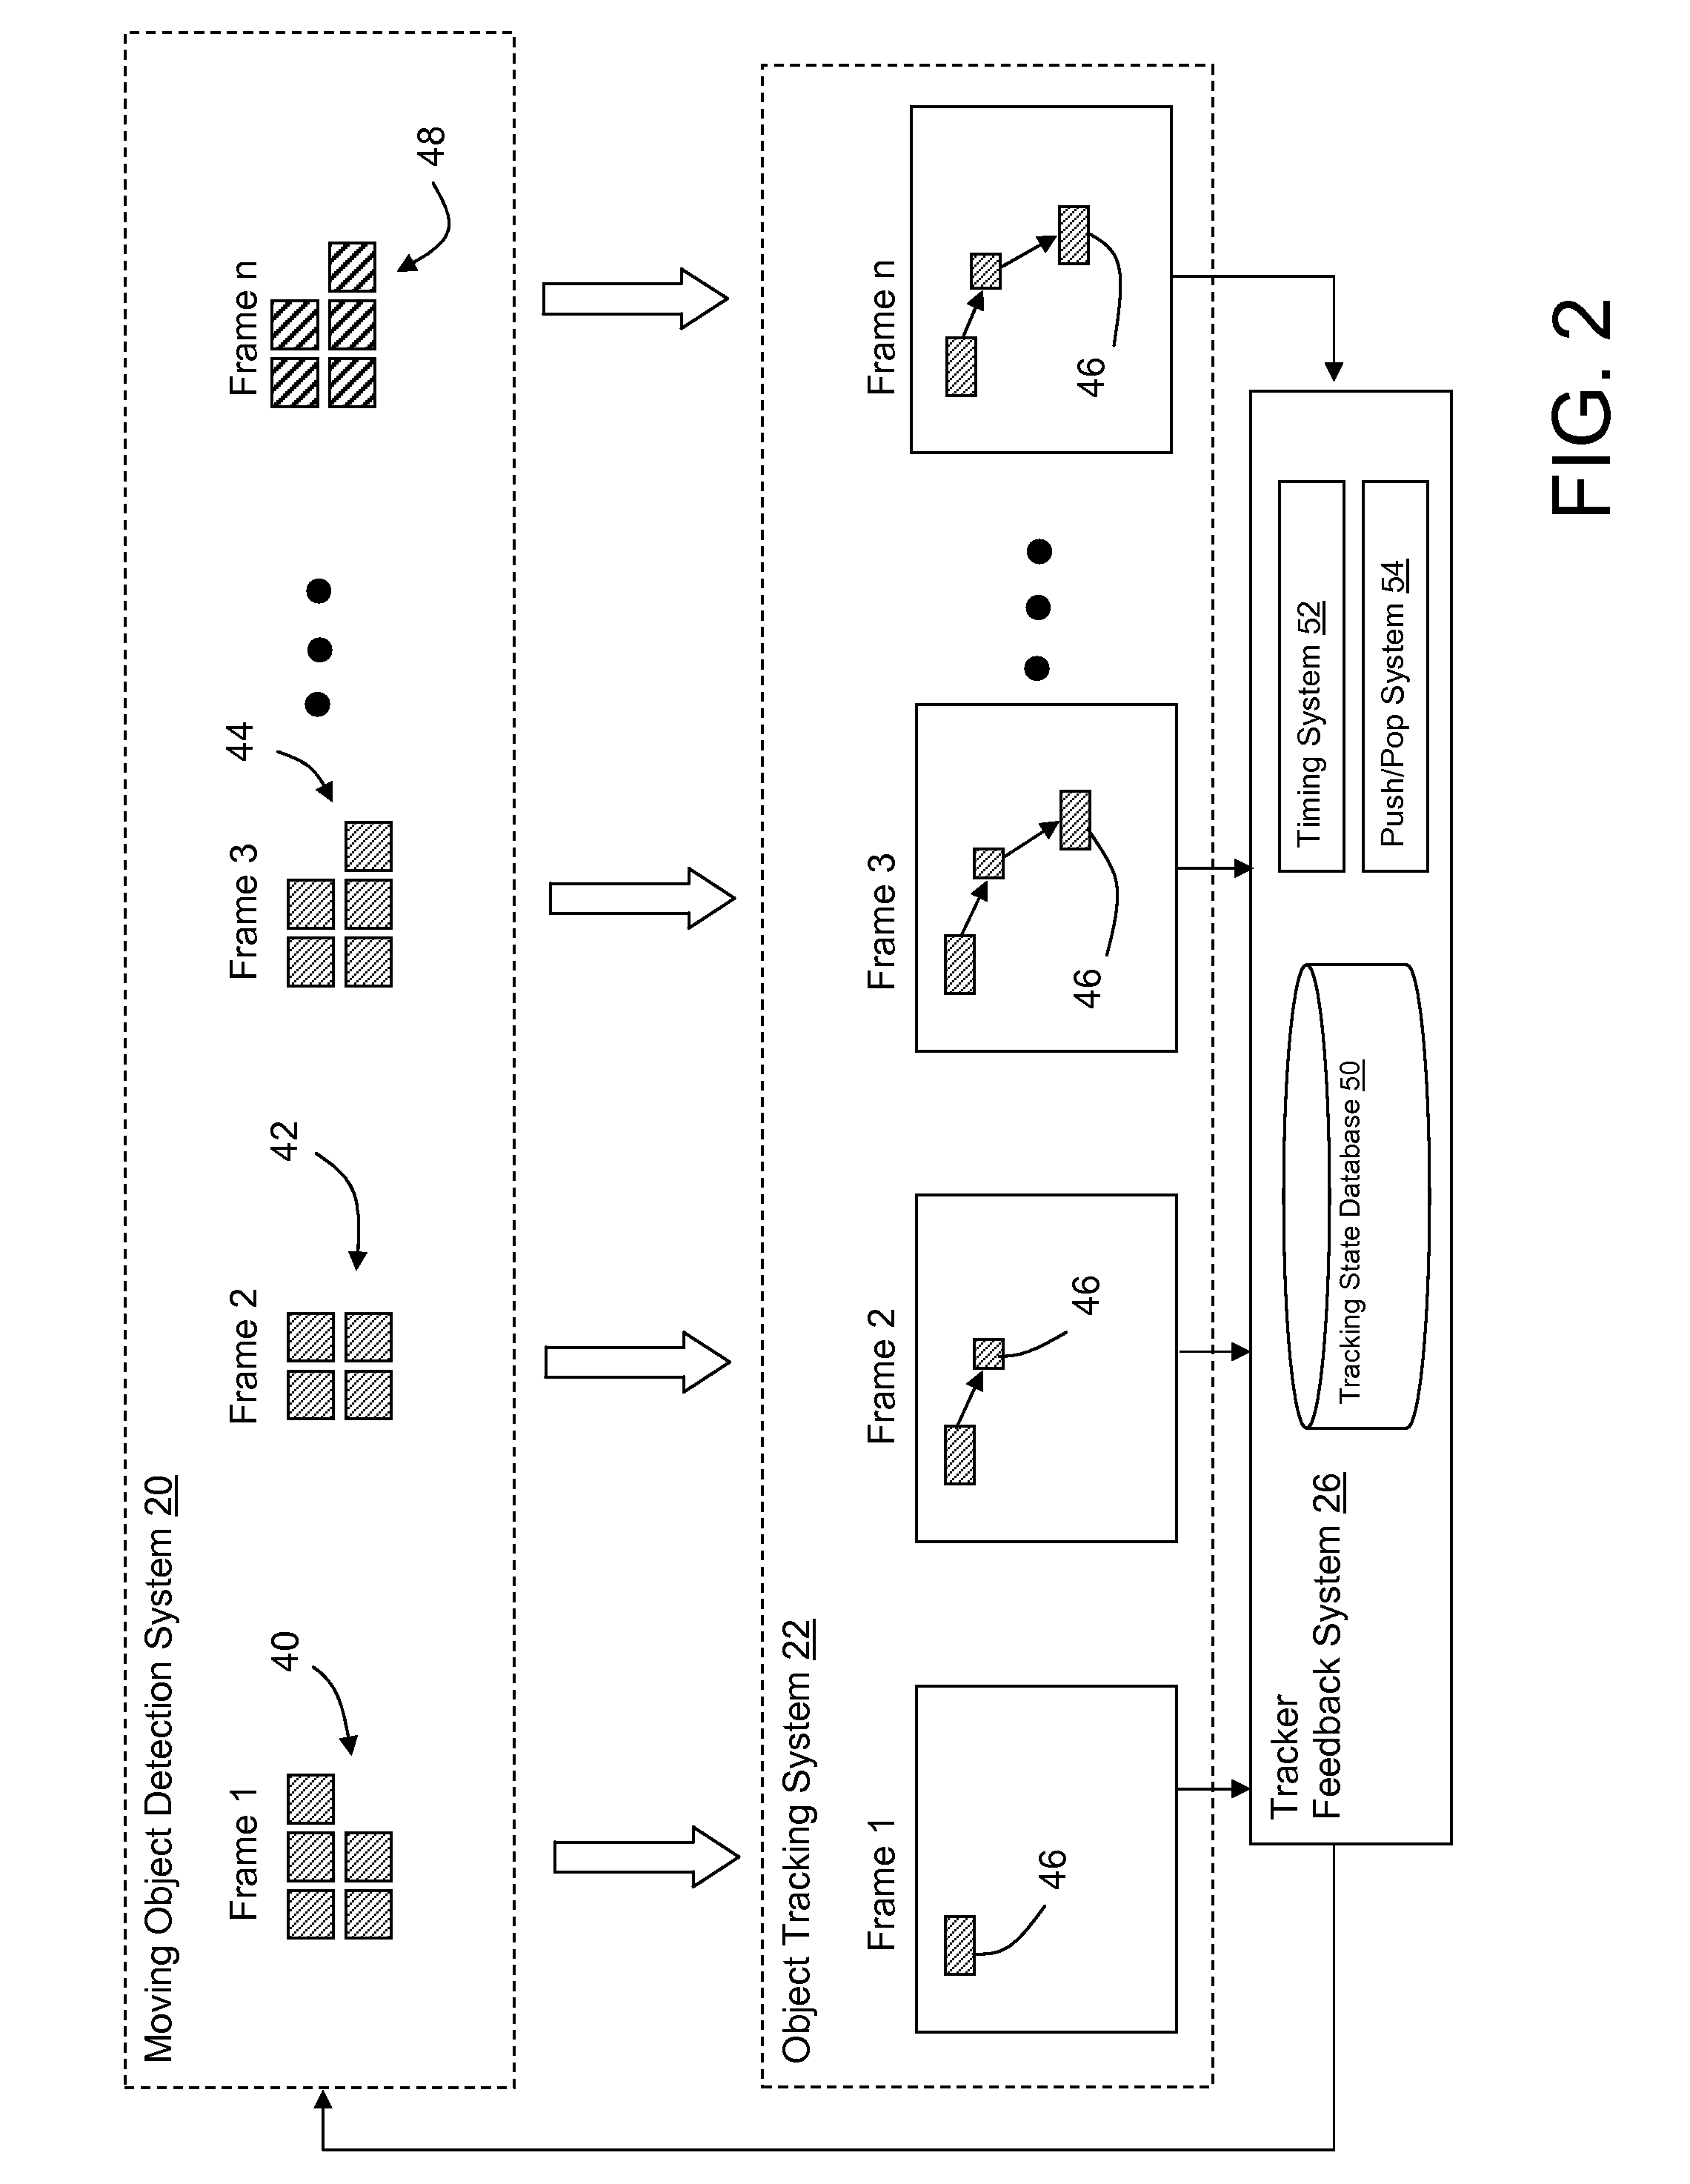 System and method for managing the interaction of object detection and tracking systems in video surveillance